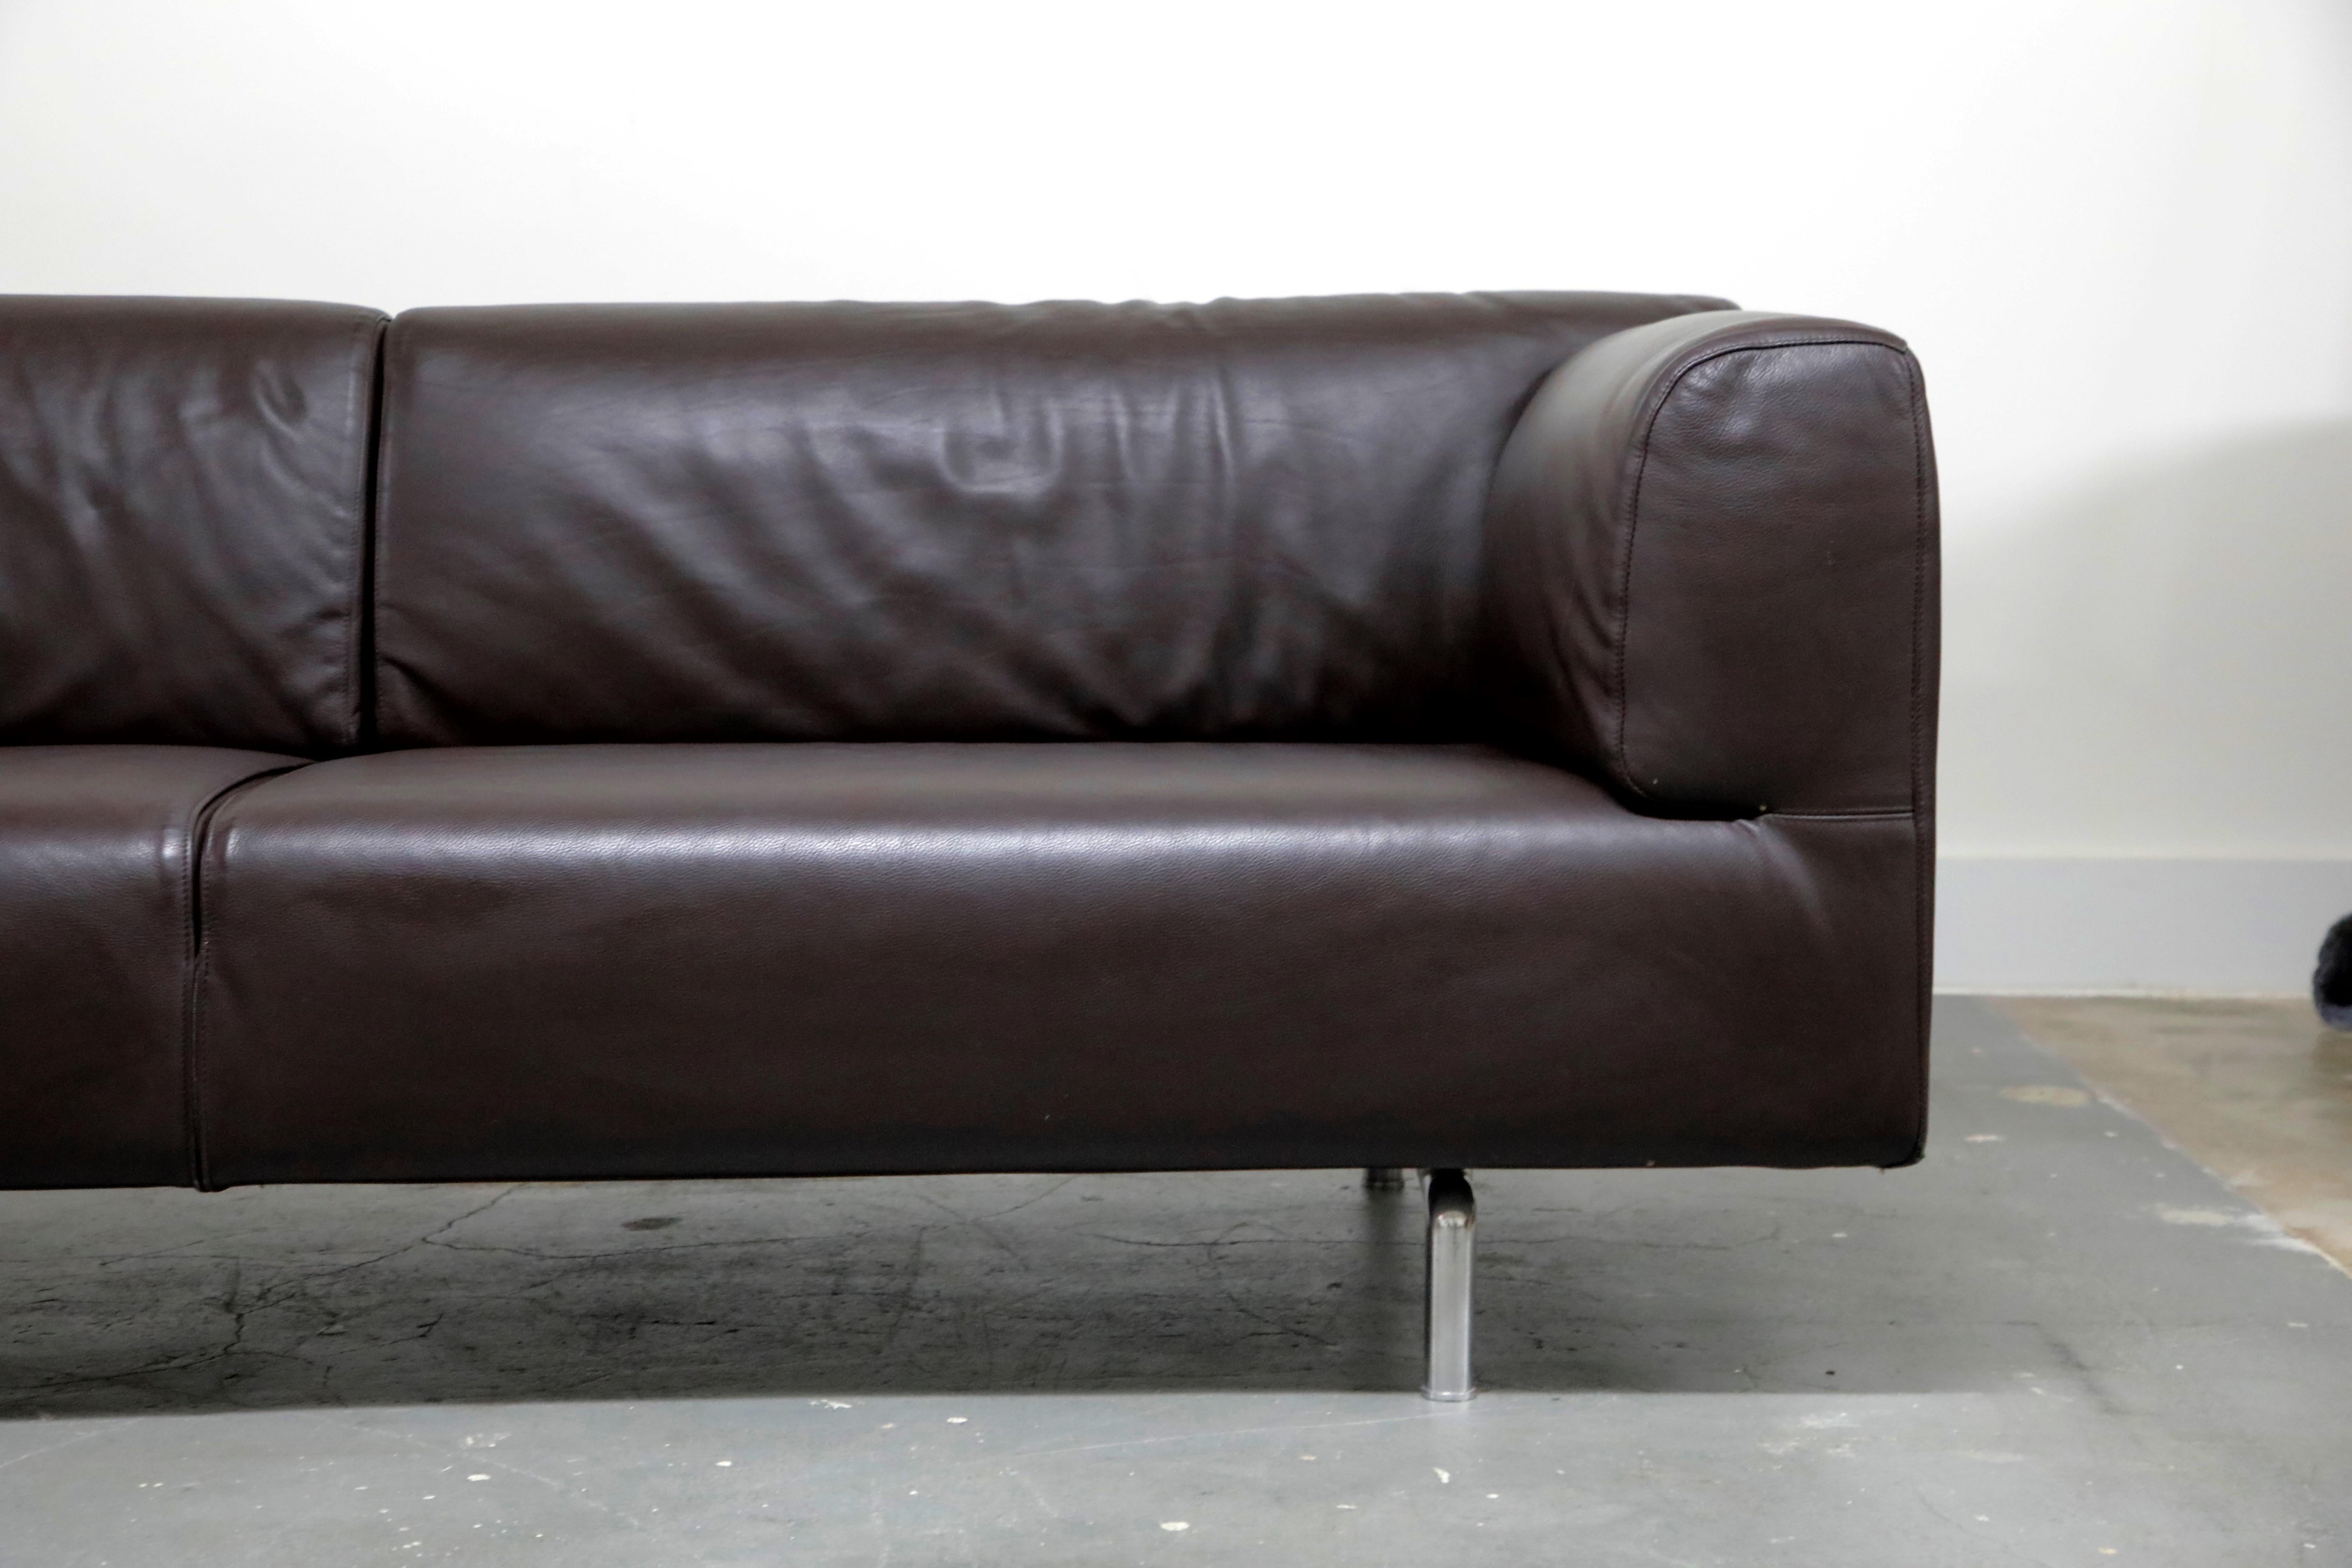 '250 Met Two-Sofa' in Dark Brown Leather by Piero Lissoni for Cassina, Signed 1